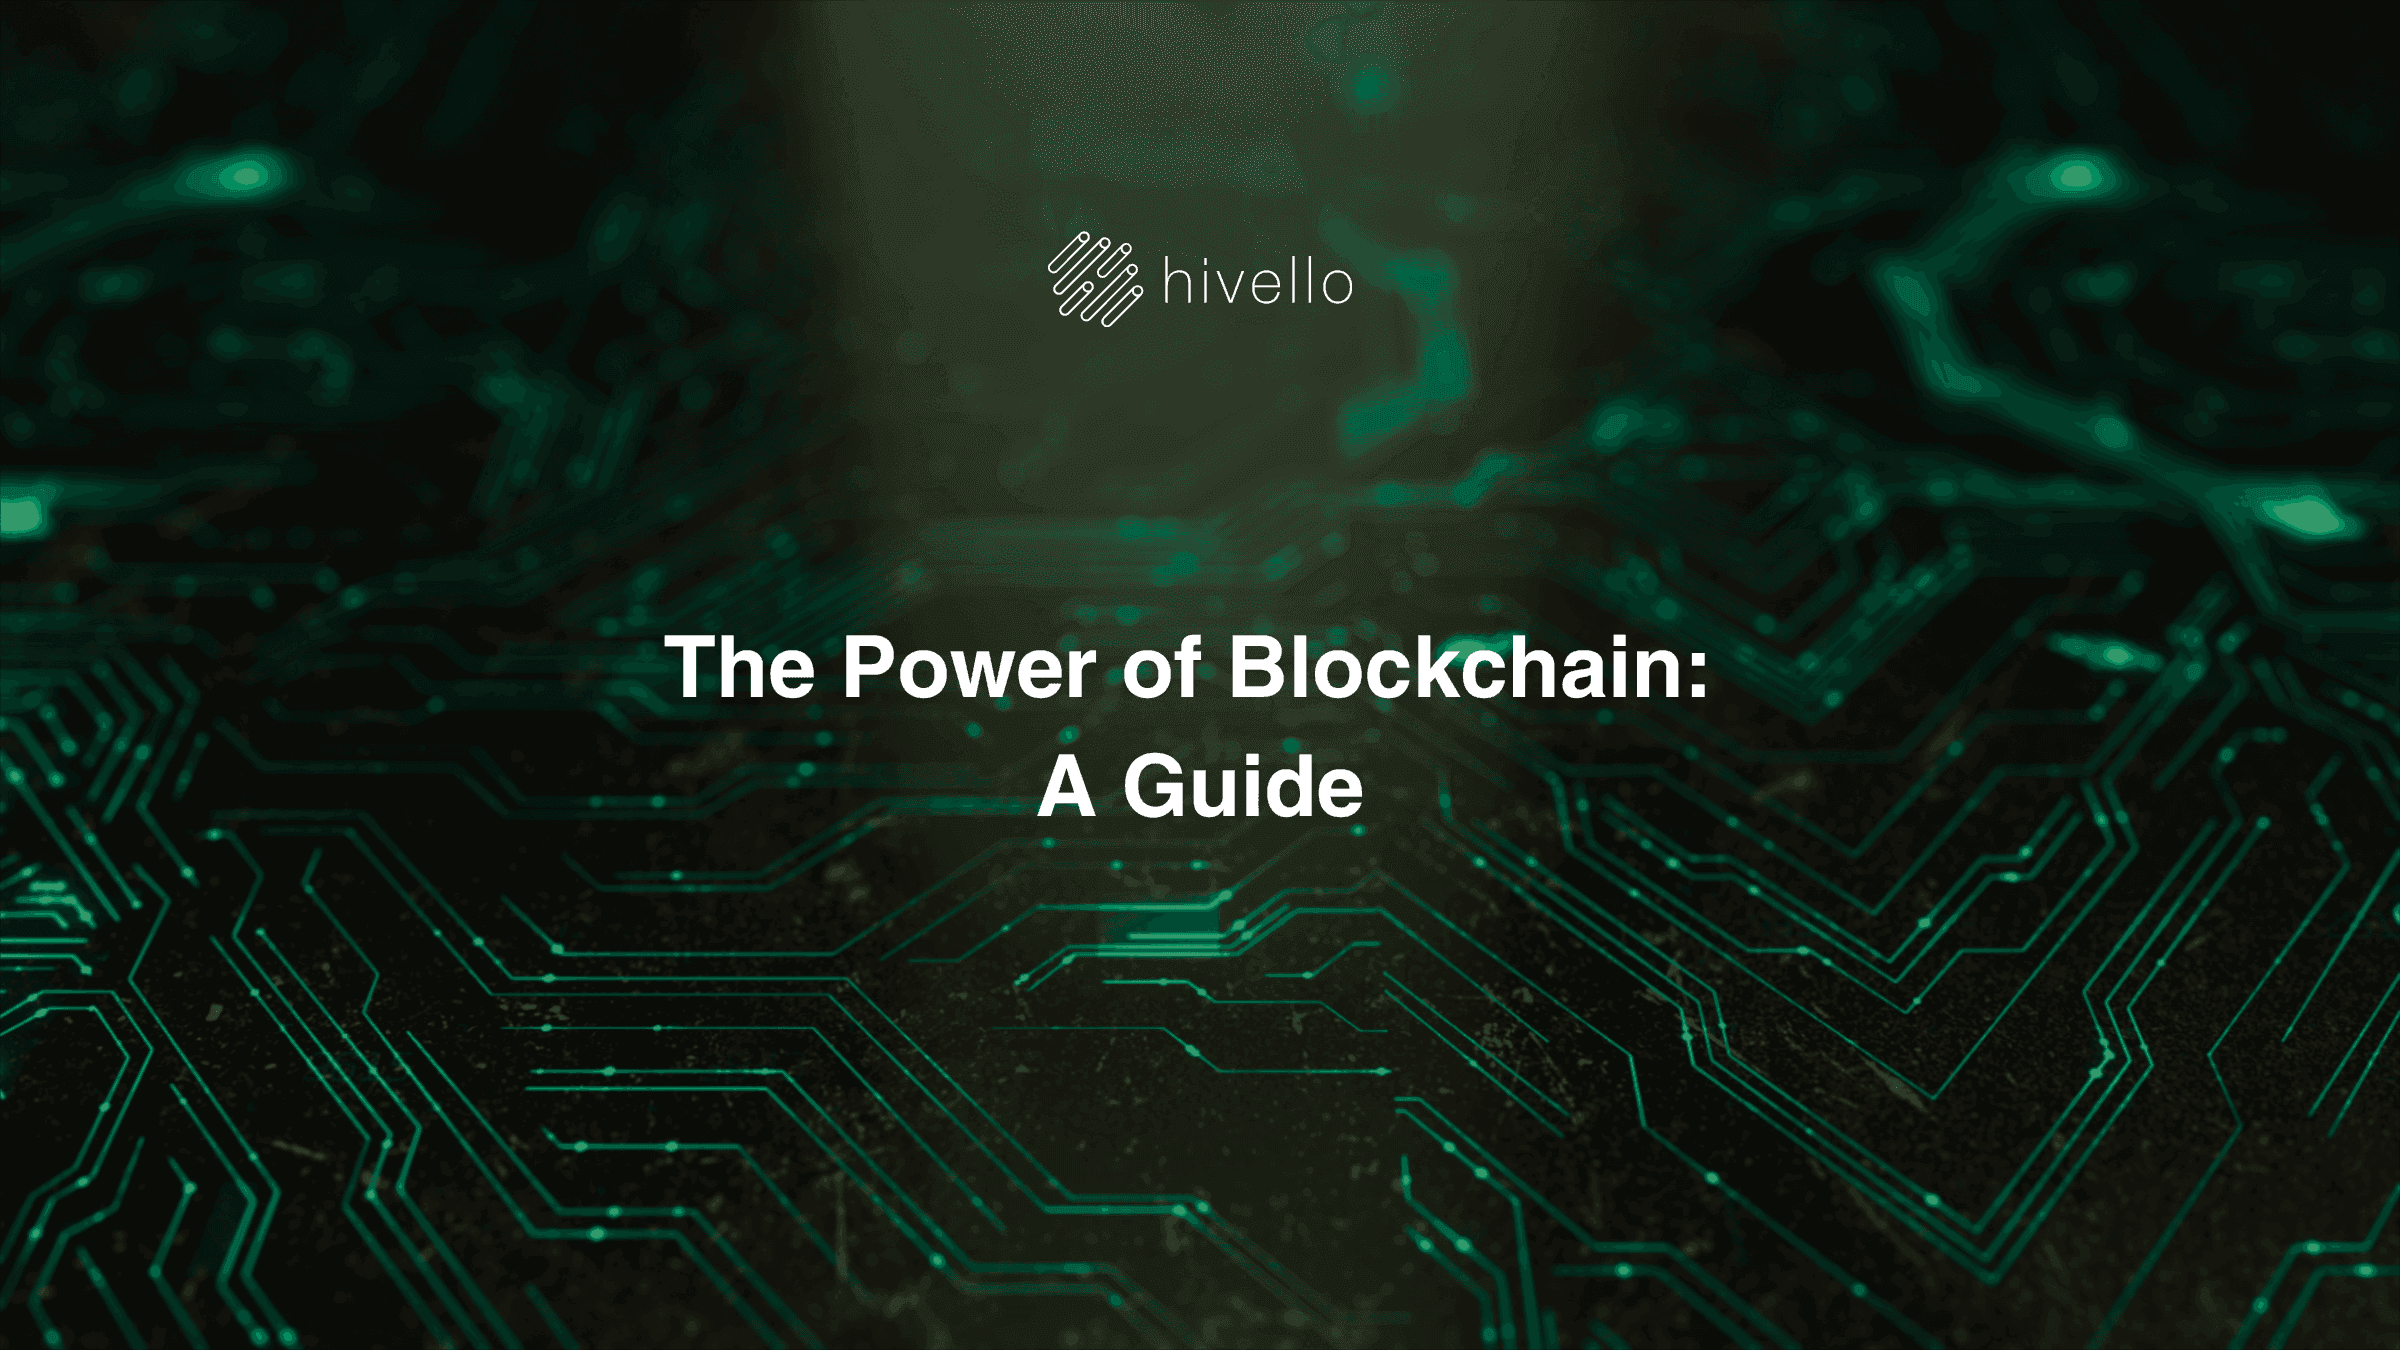 The Power of Blockchain: A Guide